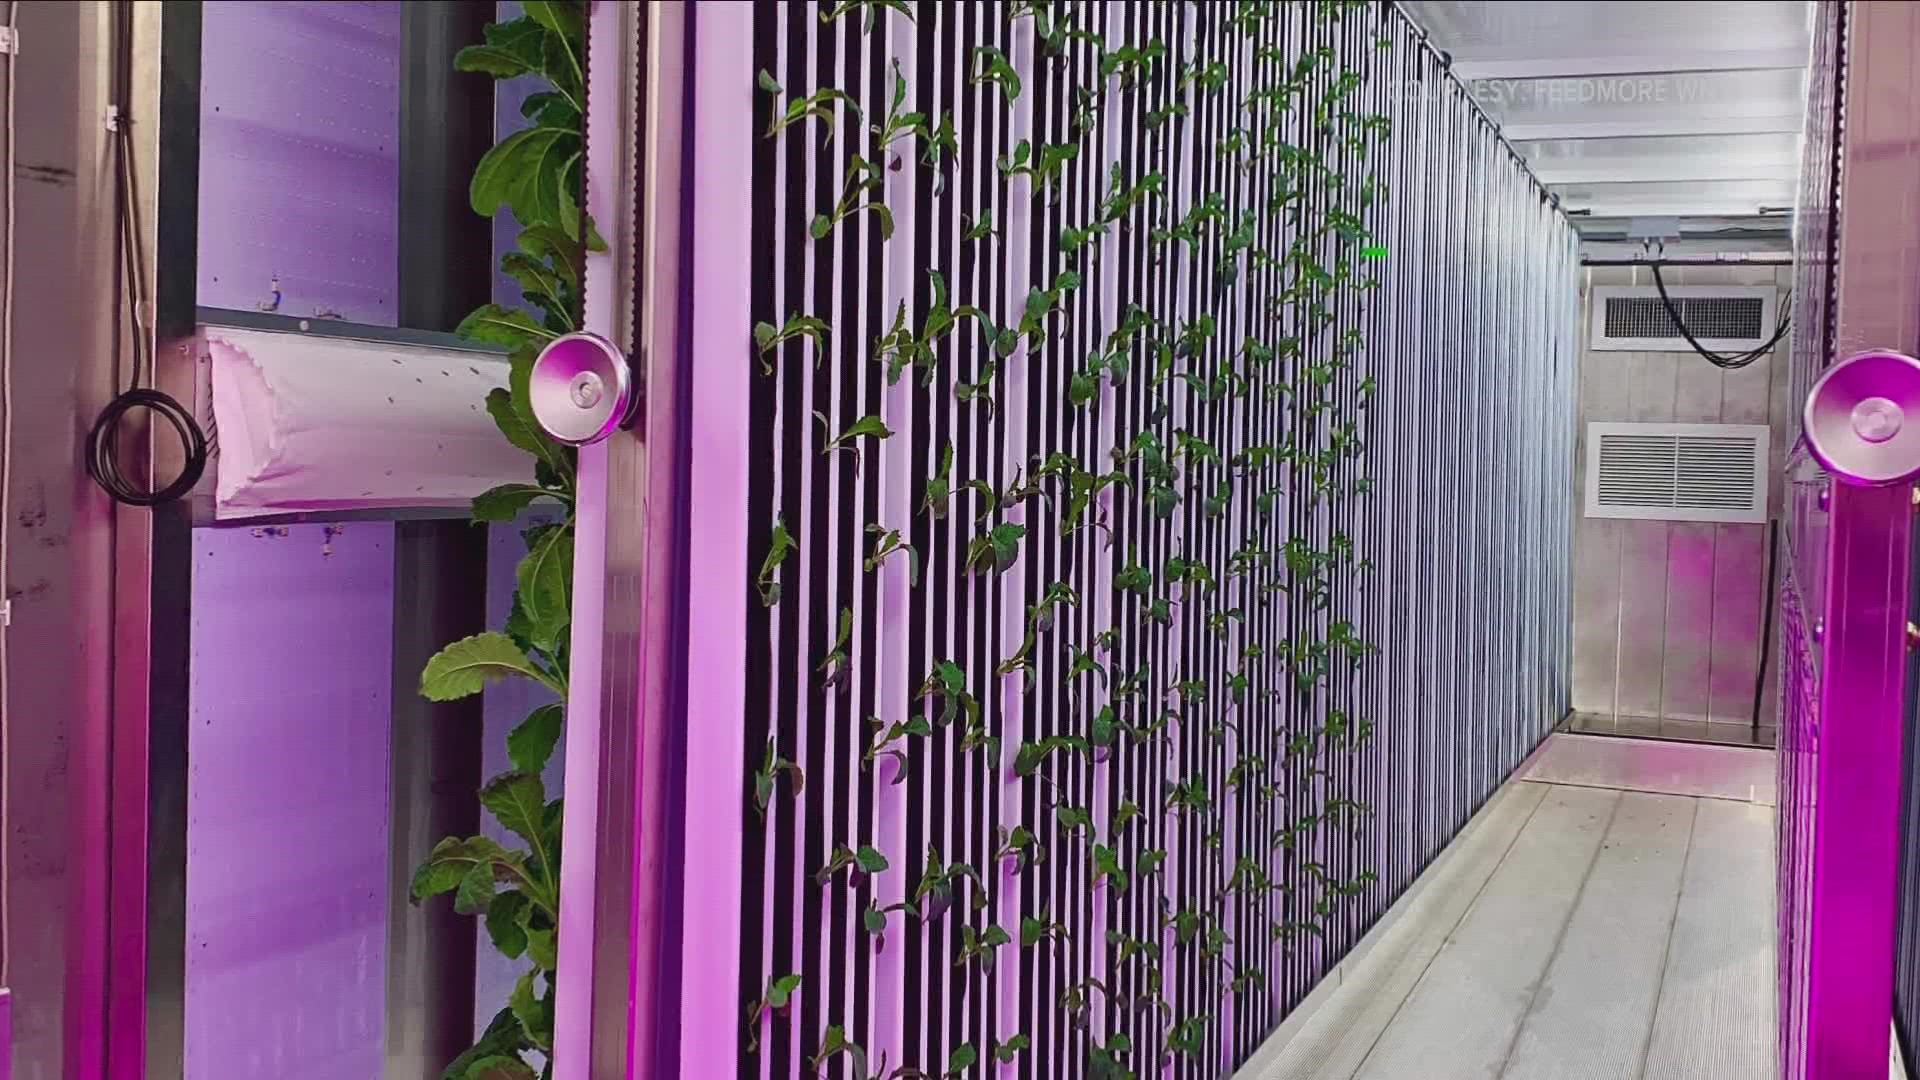 A shipping container farm allows food to be grown indoors all year long.